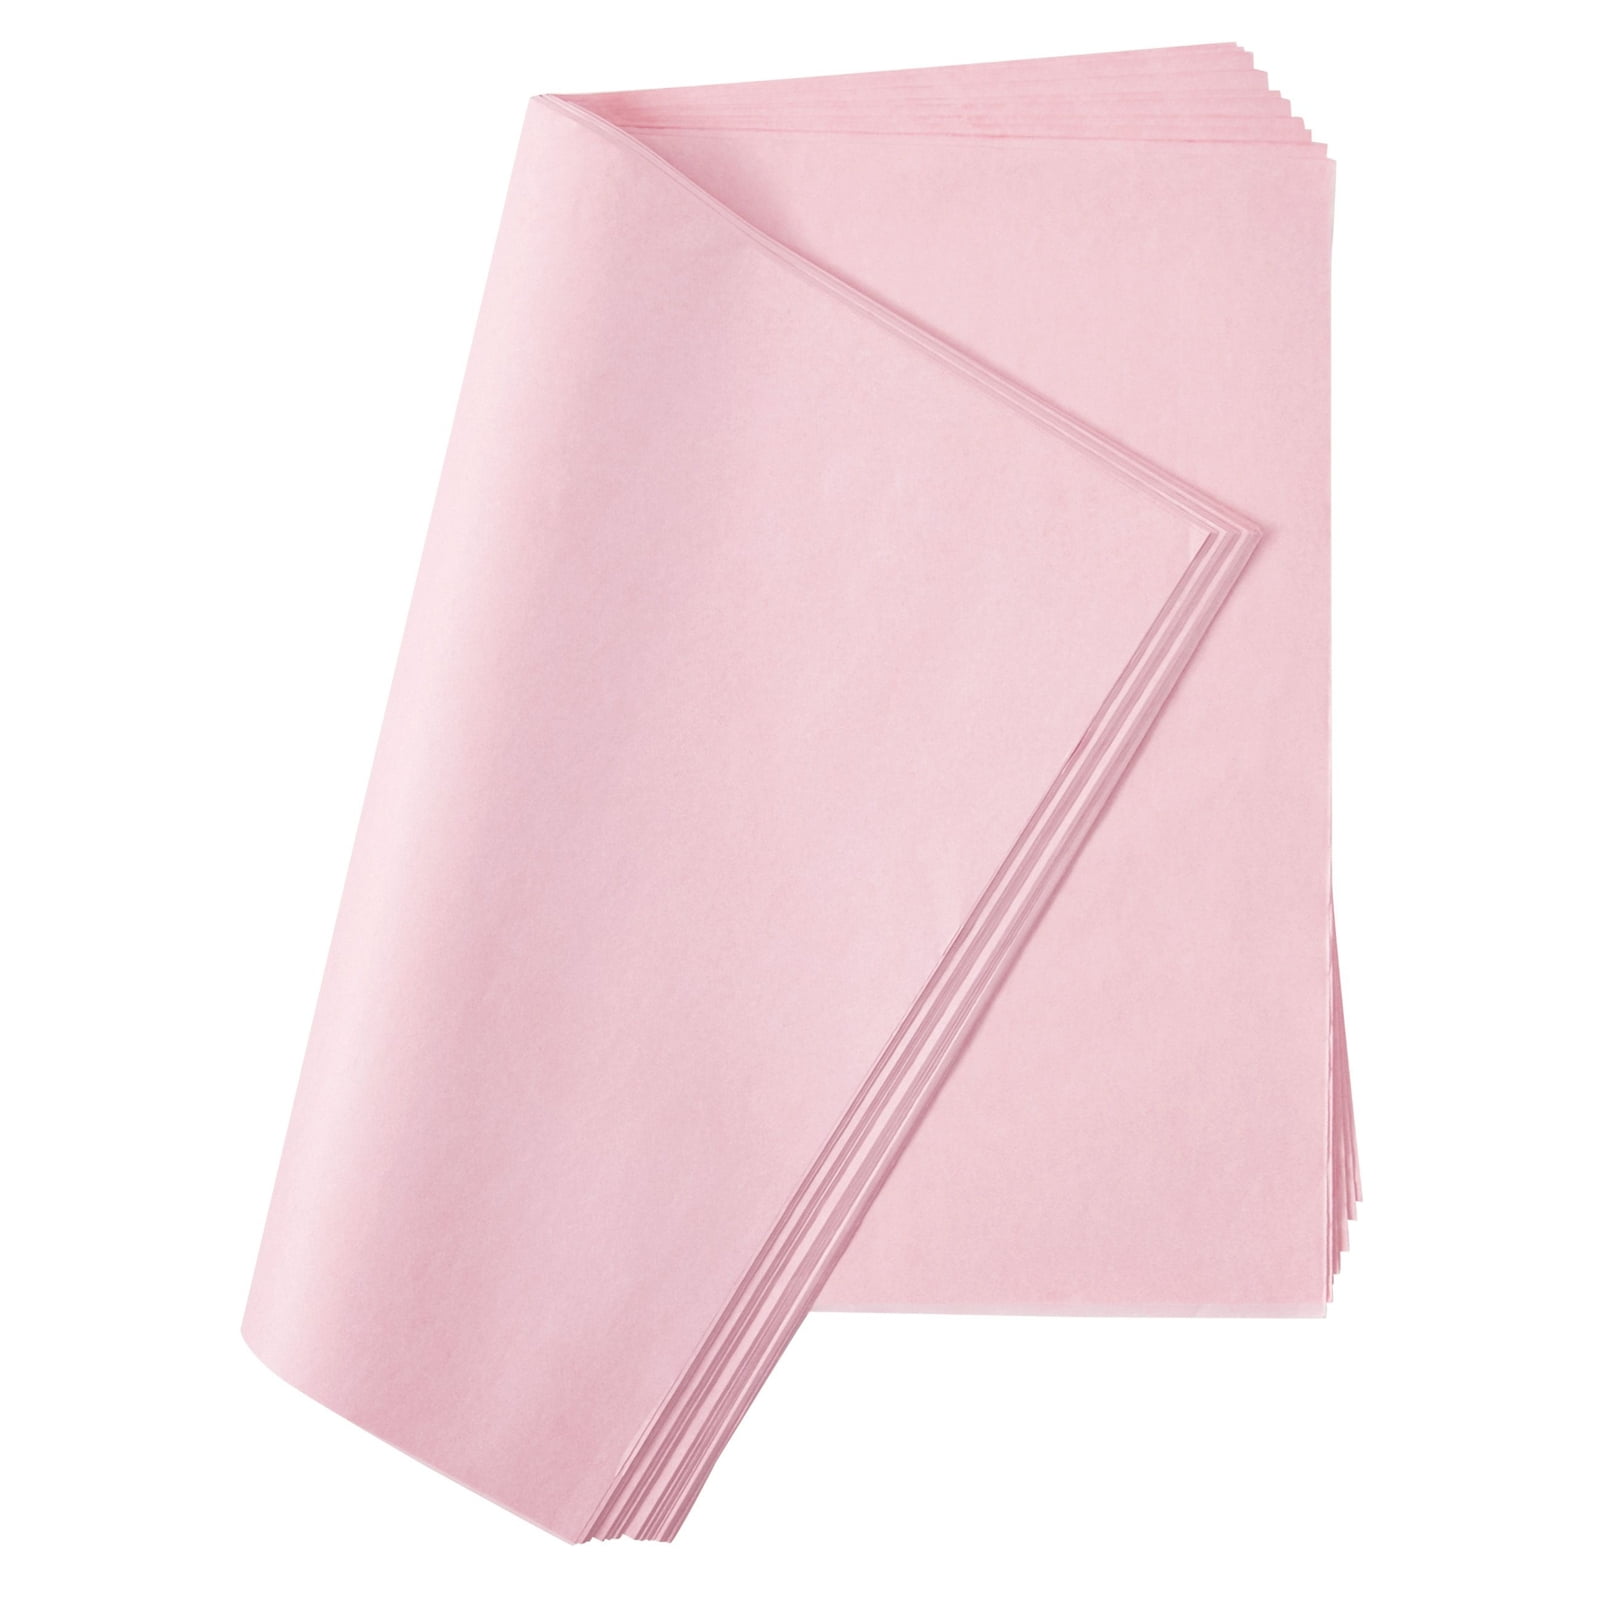 Hot Pink Color Tissue Paper, 20x30, 24 Soft Fold Sheets